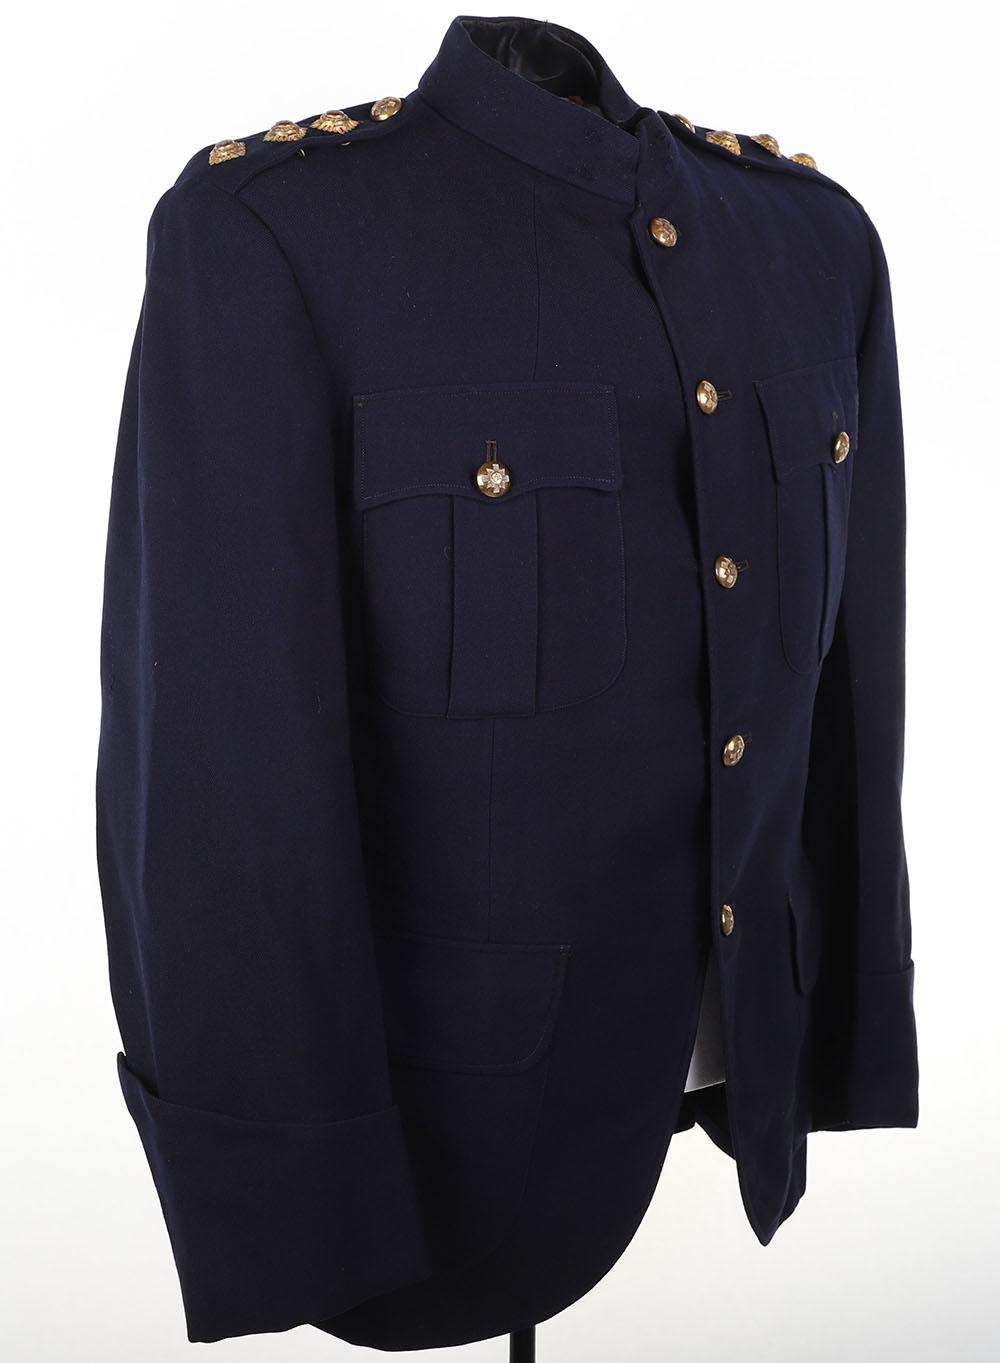 SCOTTISH OFFICERS PATROL TUNIC OF THE ROYAL HIGHLANDERS BLACK WATCH - Image 3 of 8